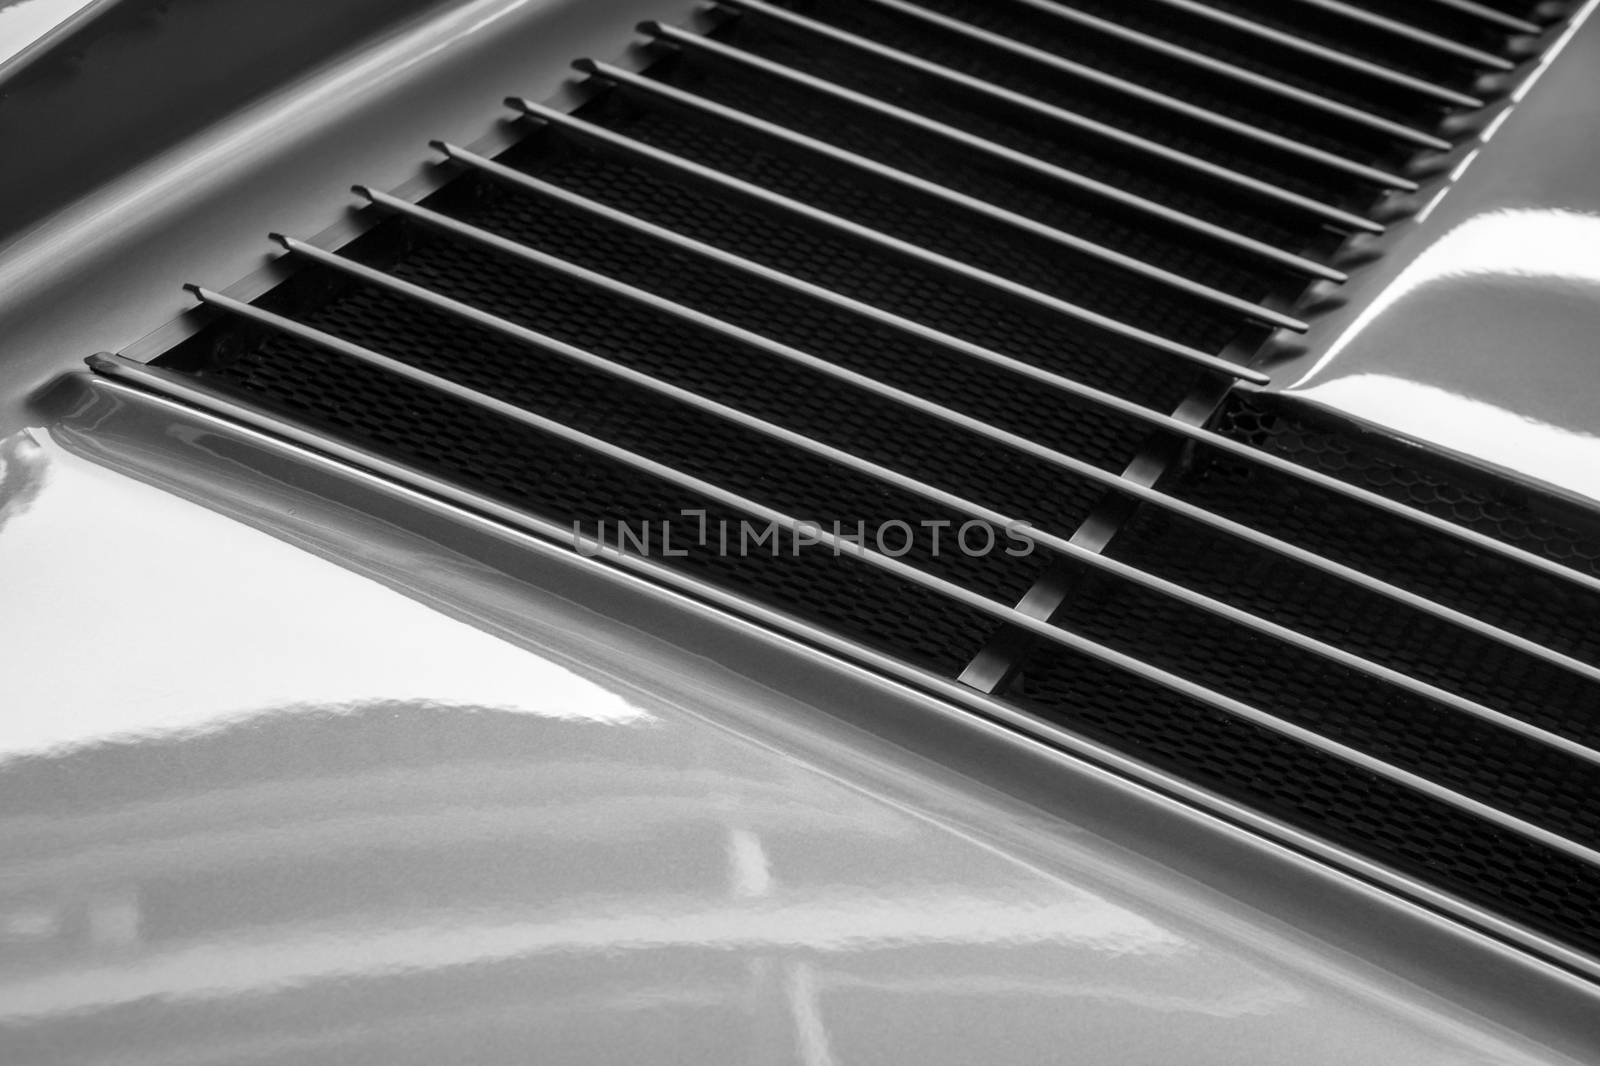 Abstract image showing detail fshot from a sportscar bodywork